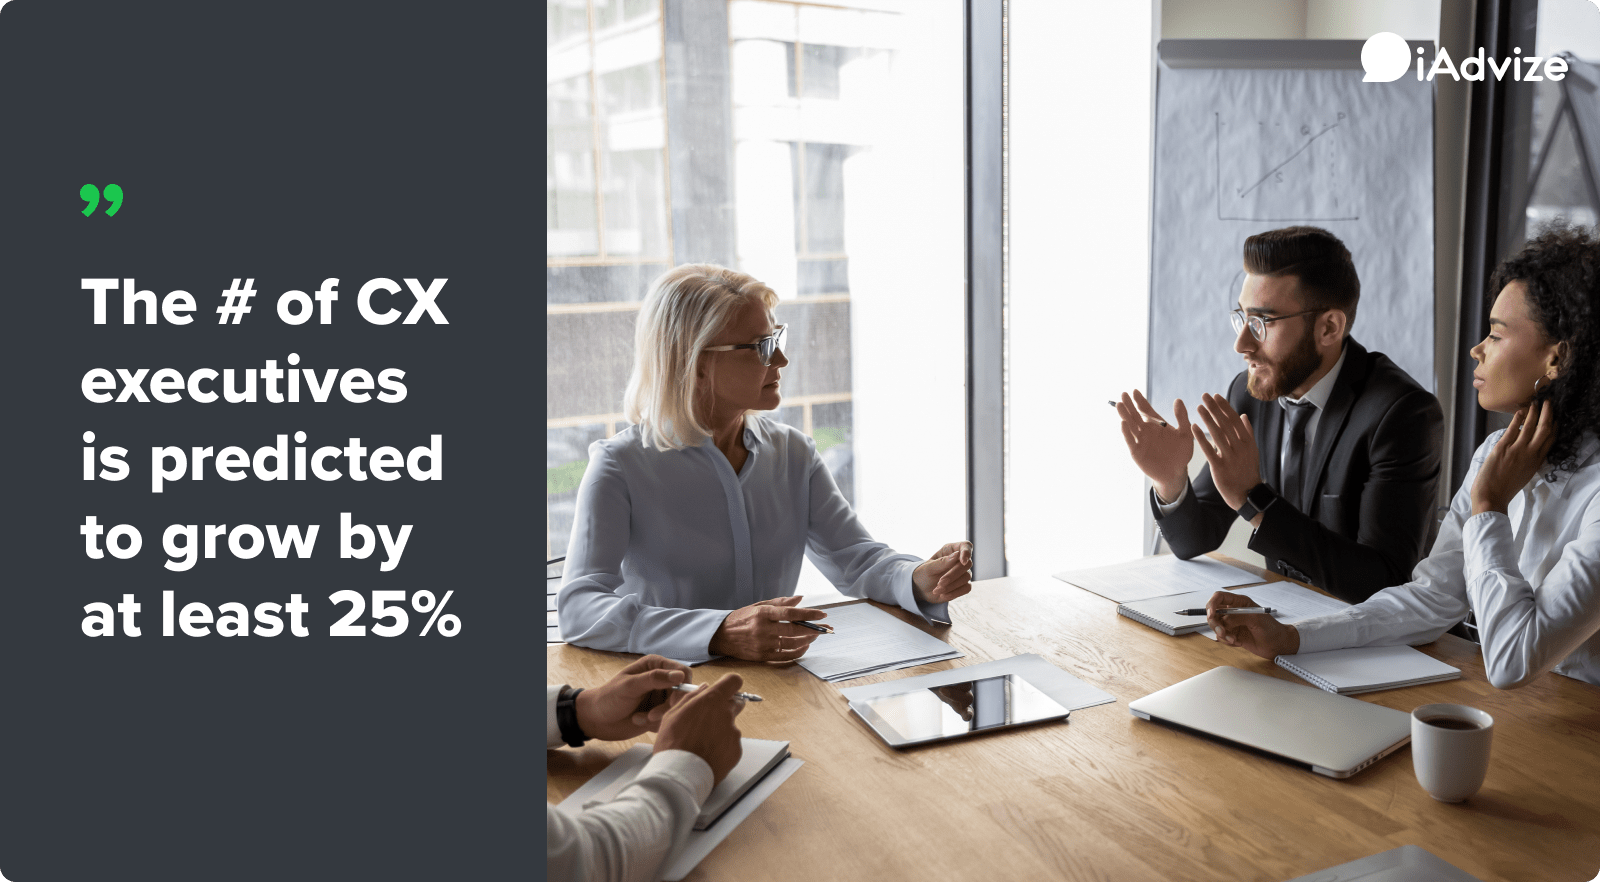 CX executives will also grow by 25% in a year